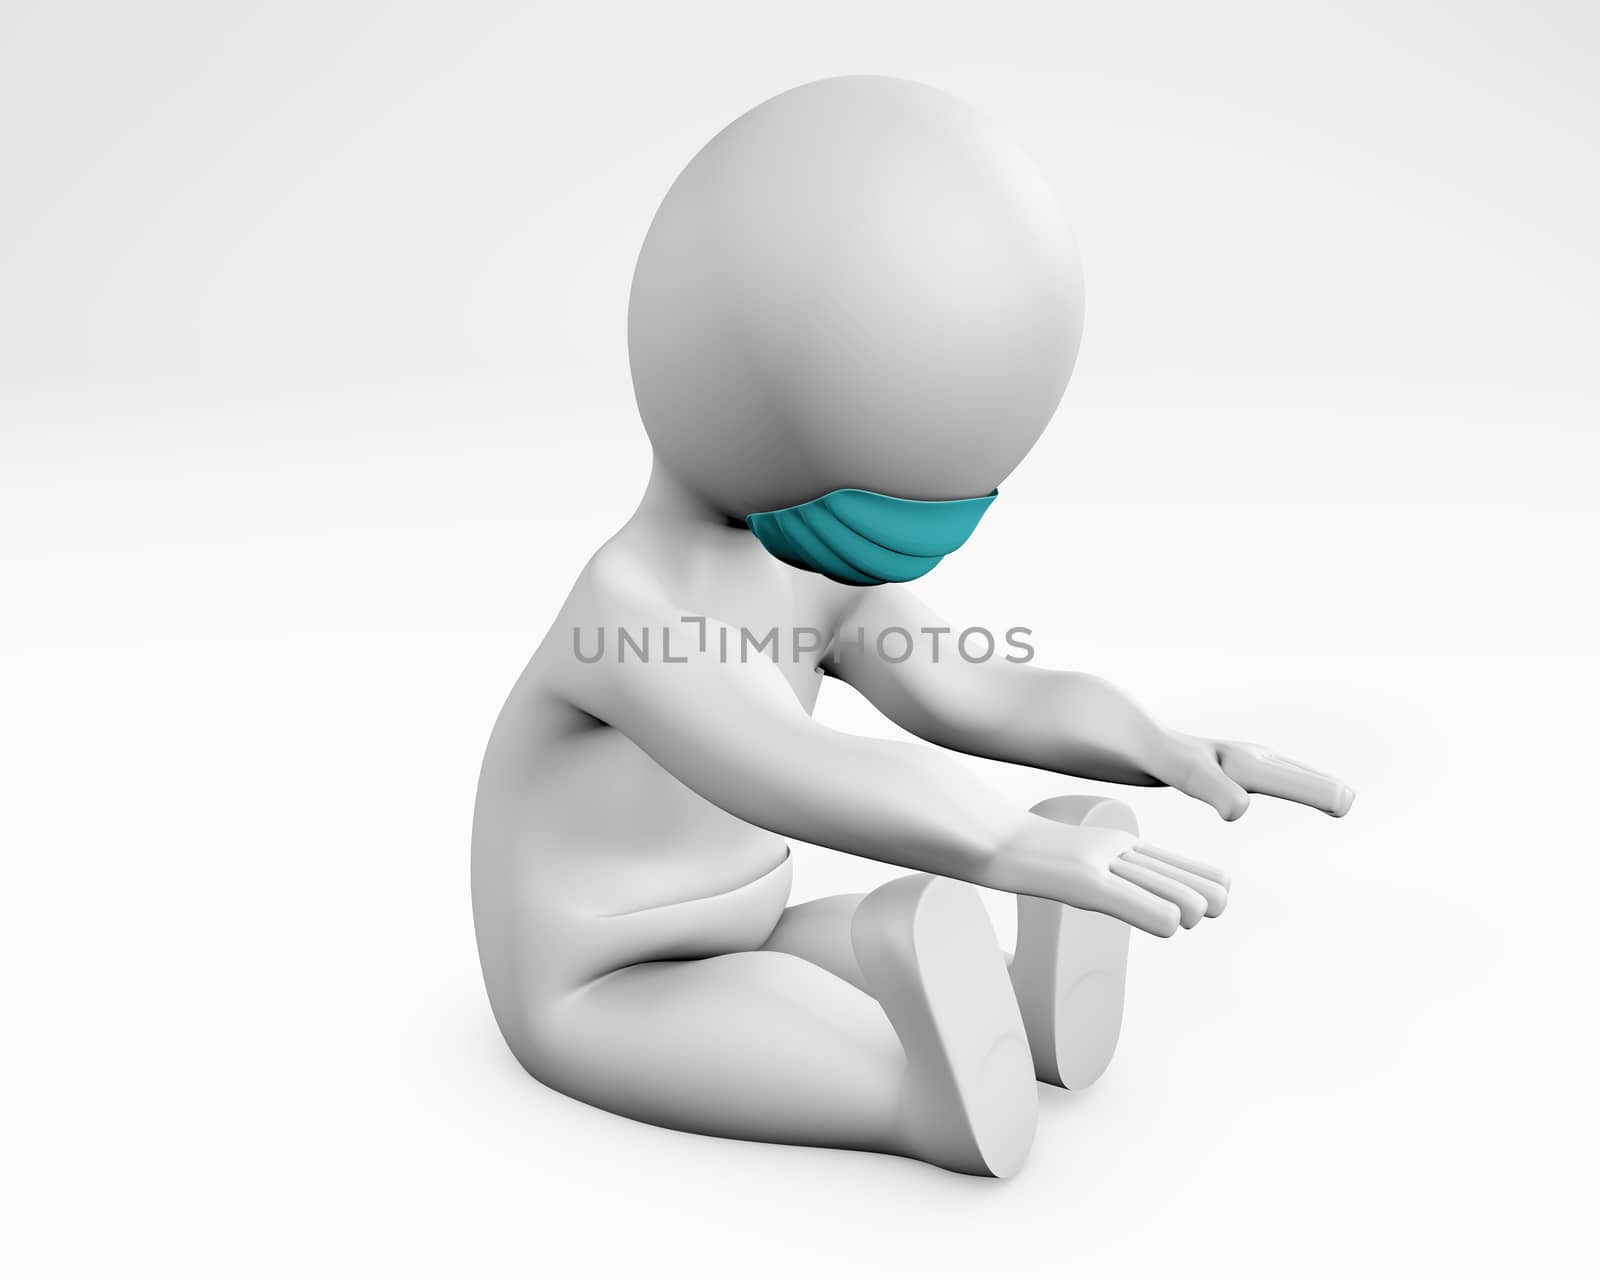 Man with mask excersizing at home 3d rendering by F1b0nacci